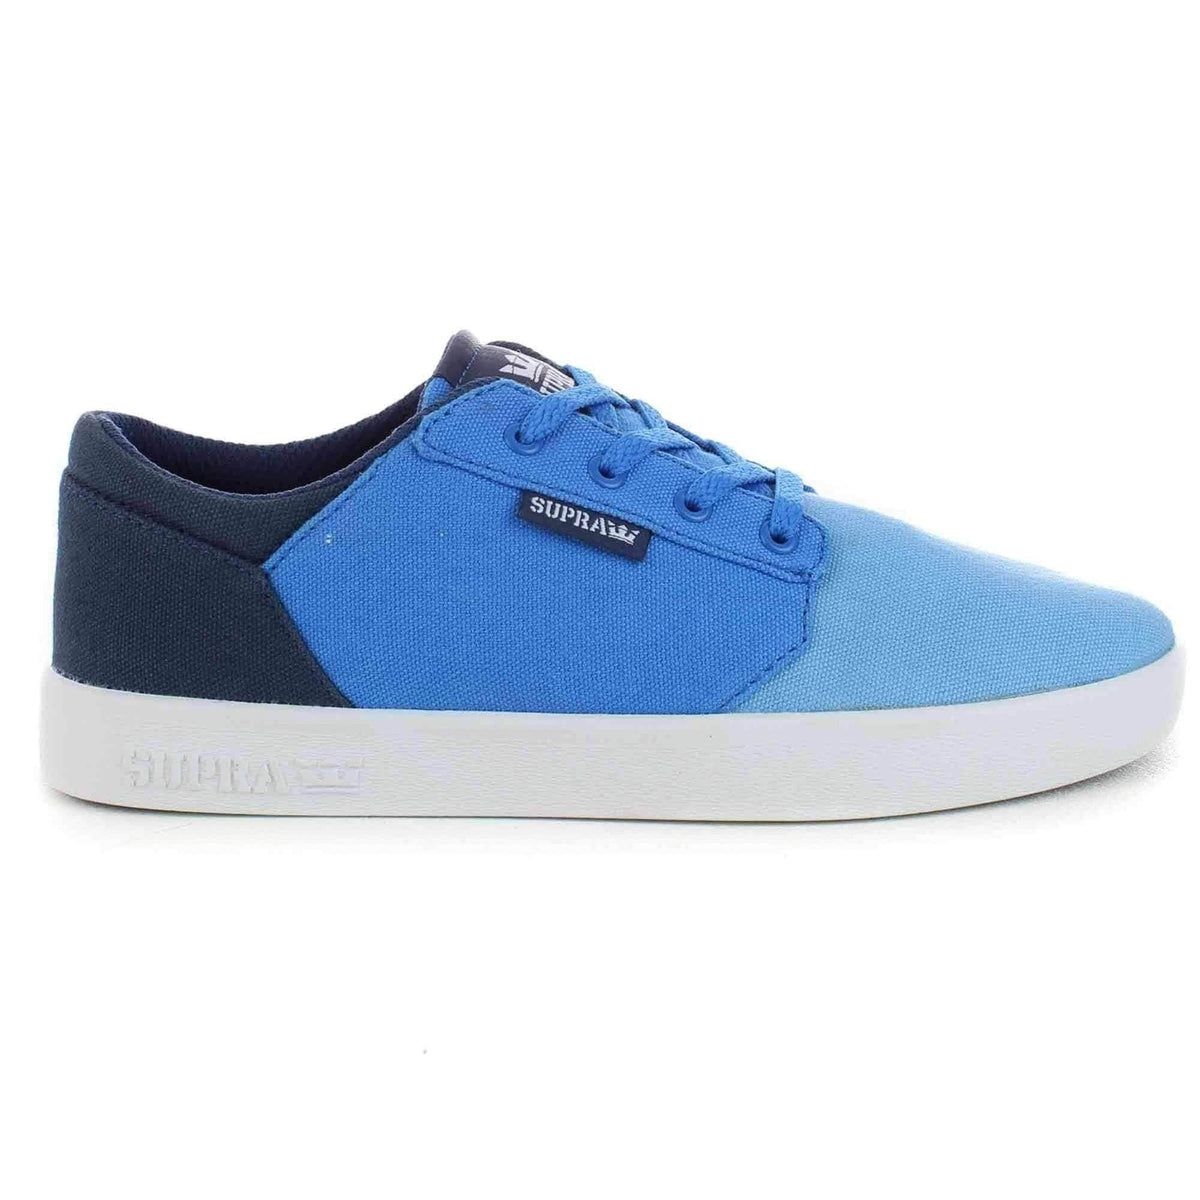 Supra Youths Yorek Low Shoes in Blue Fade White - Boys Skate Shoes by Supra